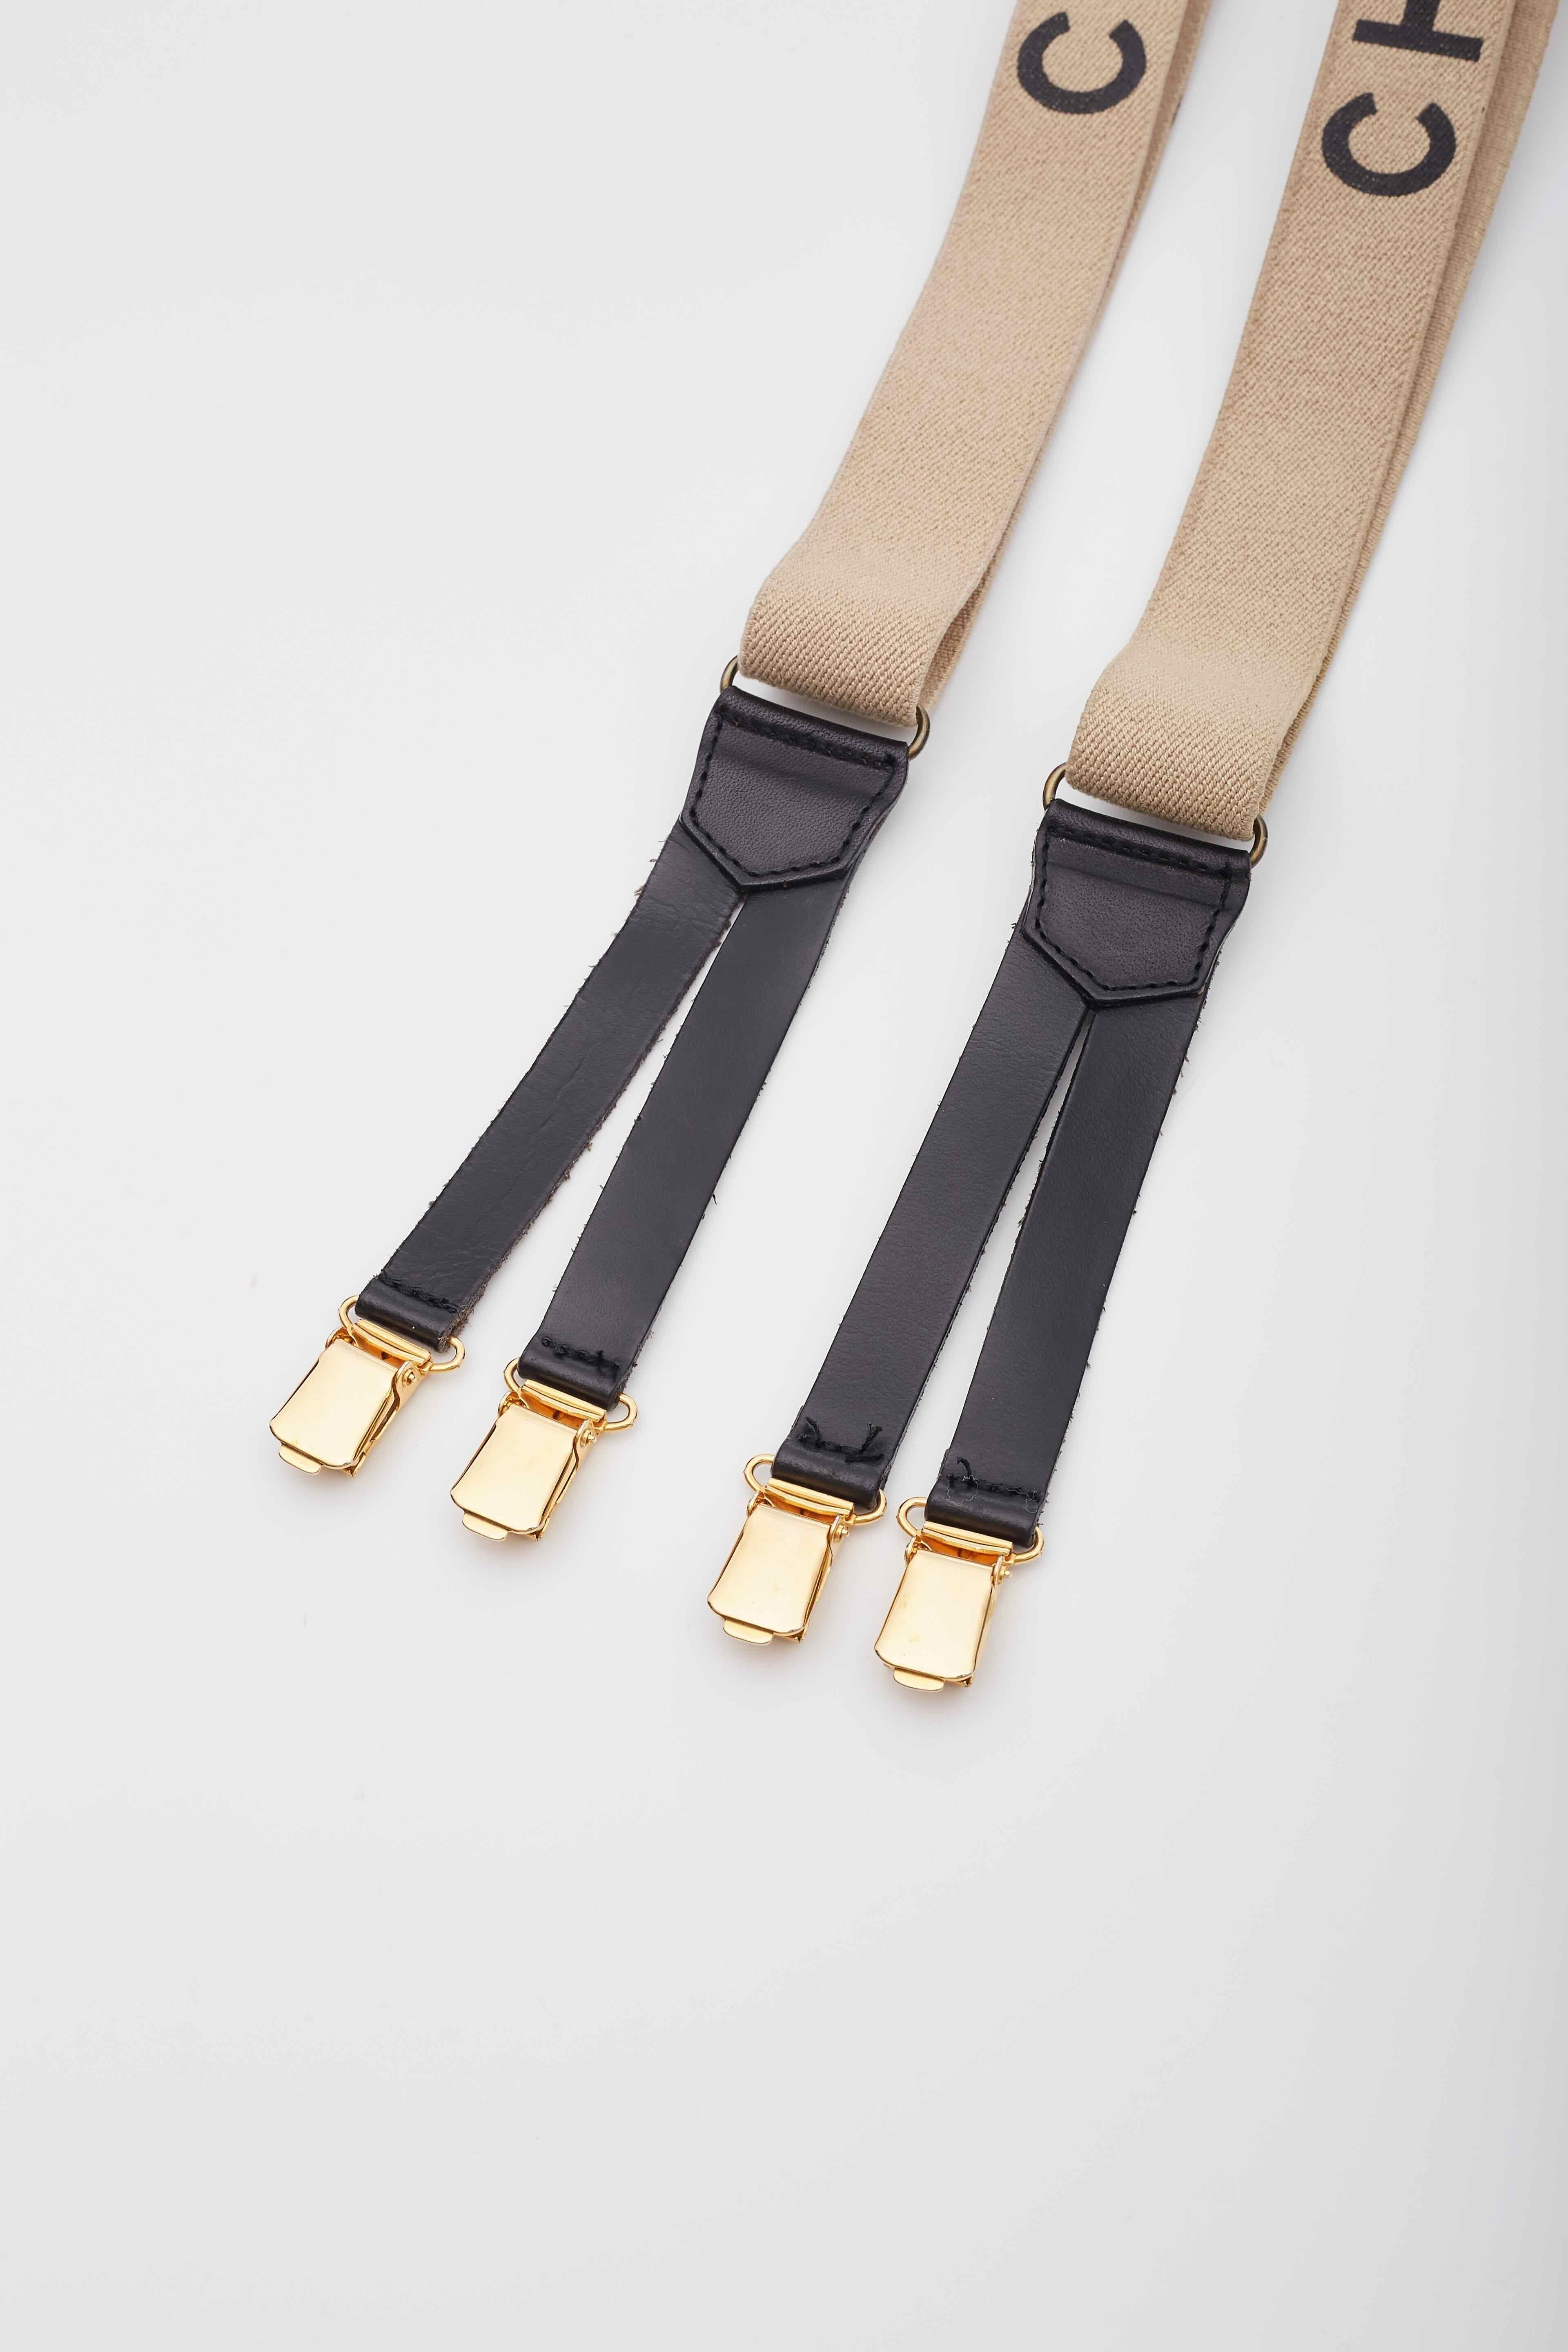 Chanel Elastic Logo Suspenders Beige Black In Good Condition For Sale In Montreal, Quebec